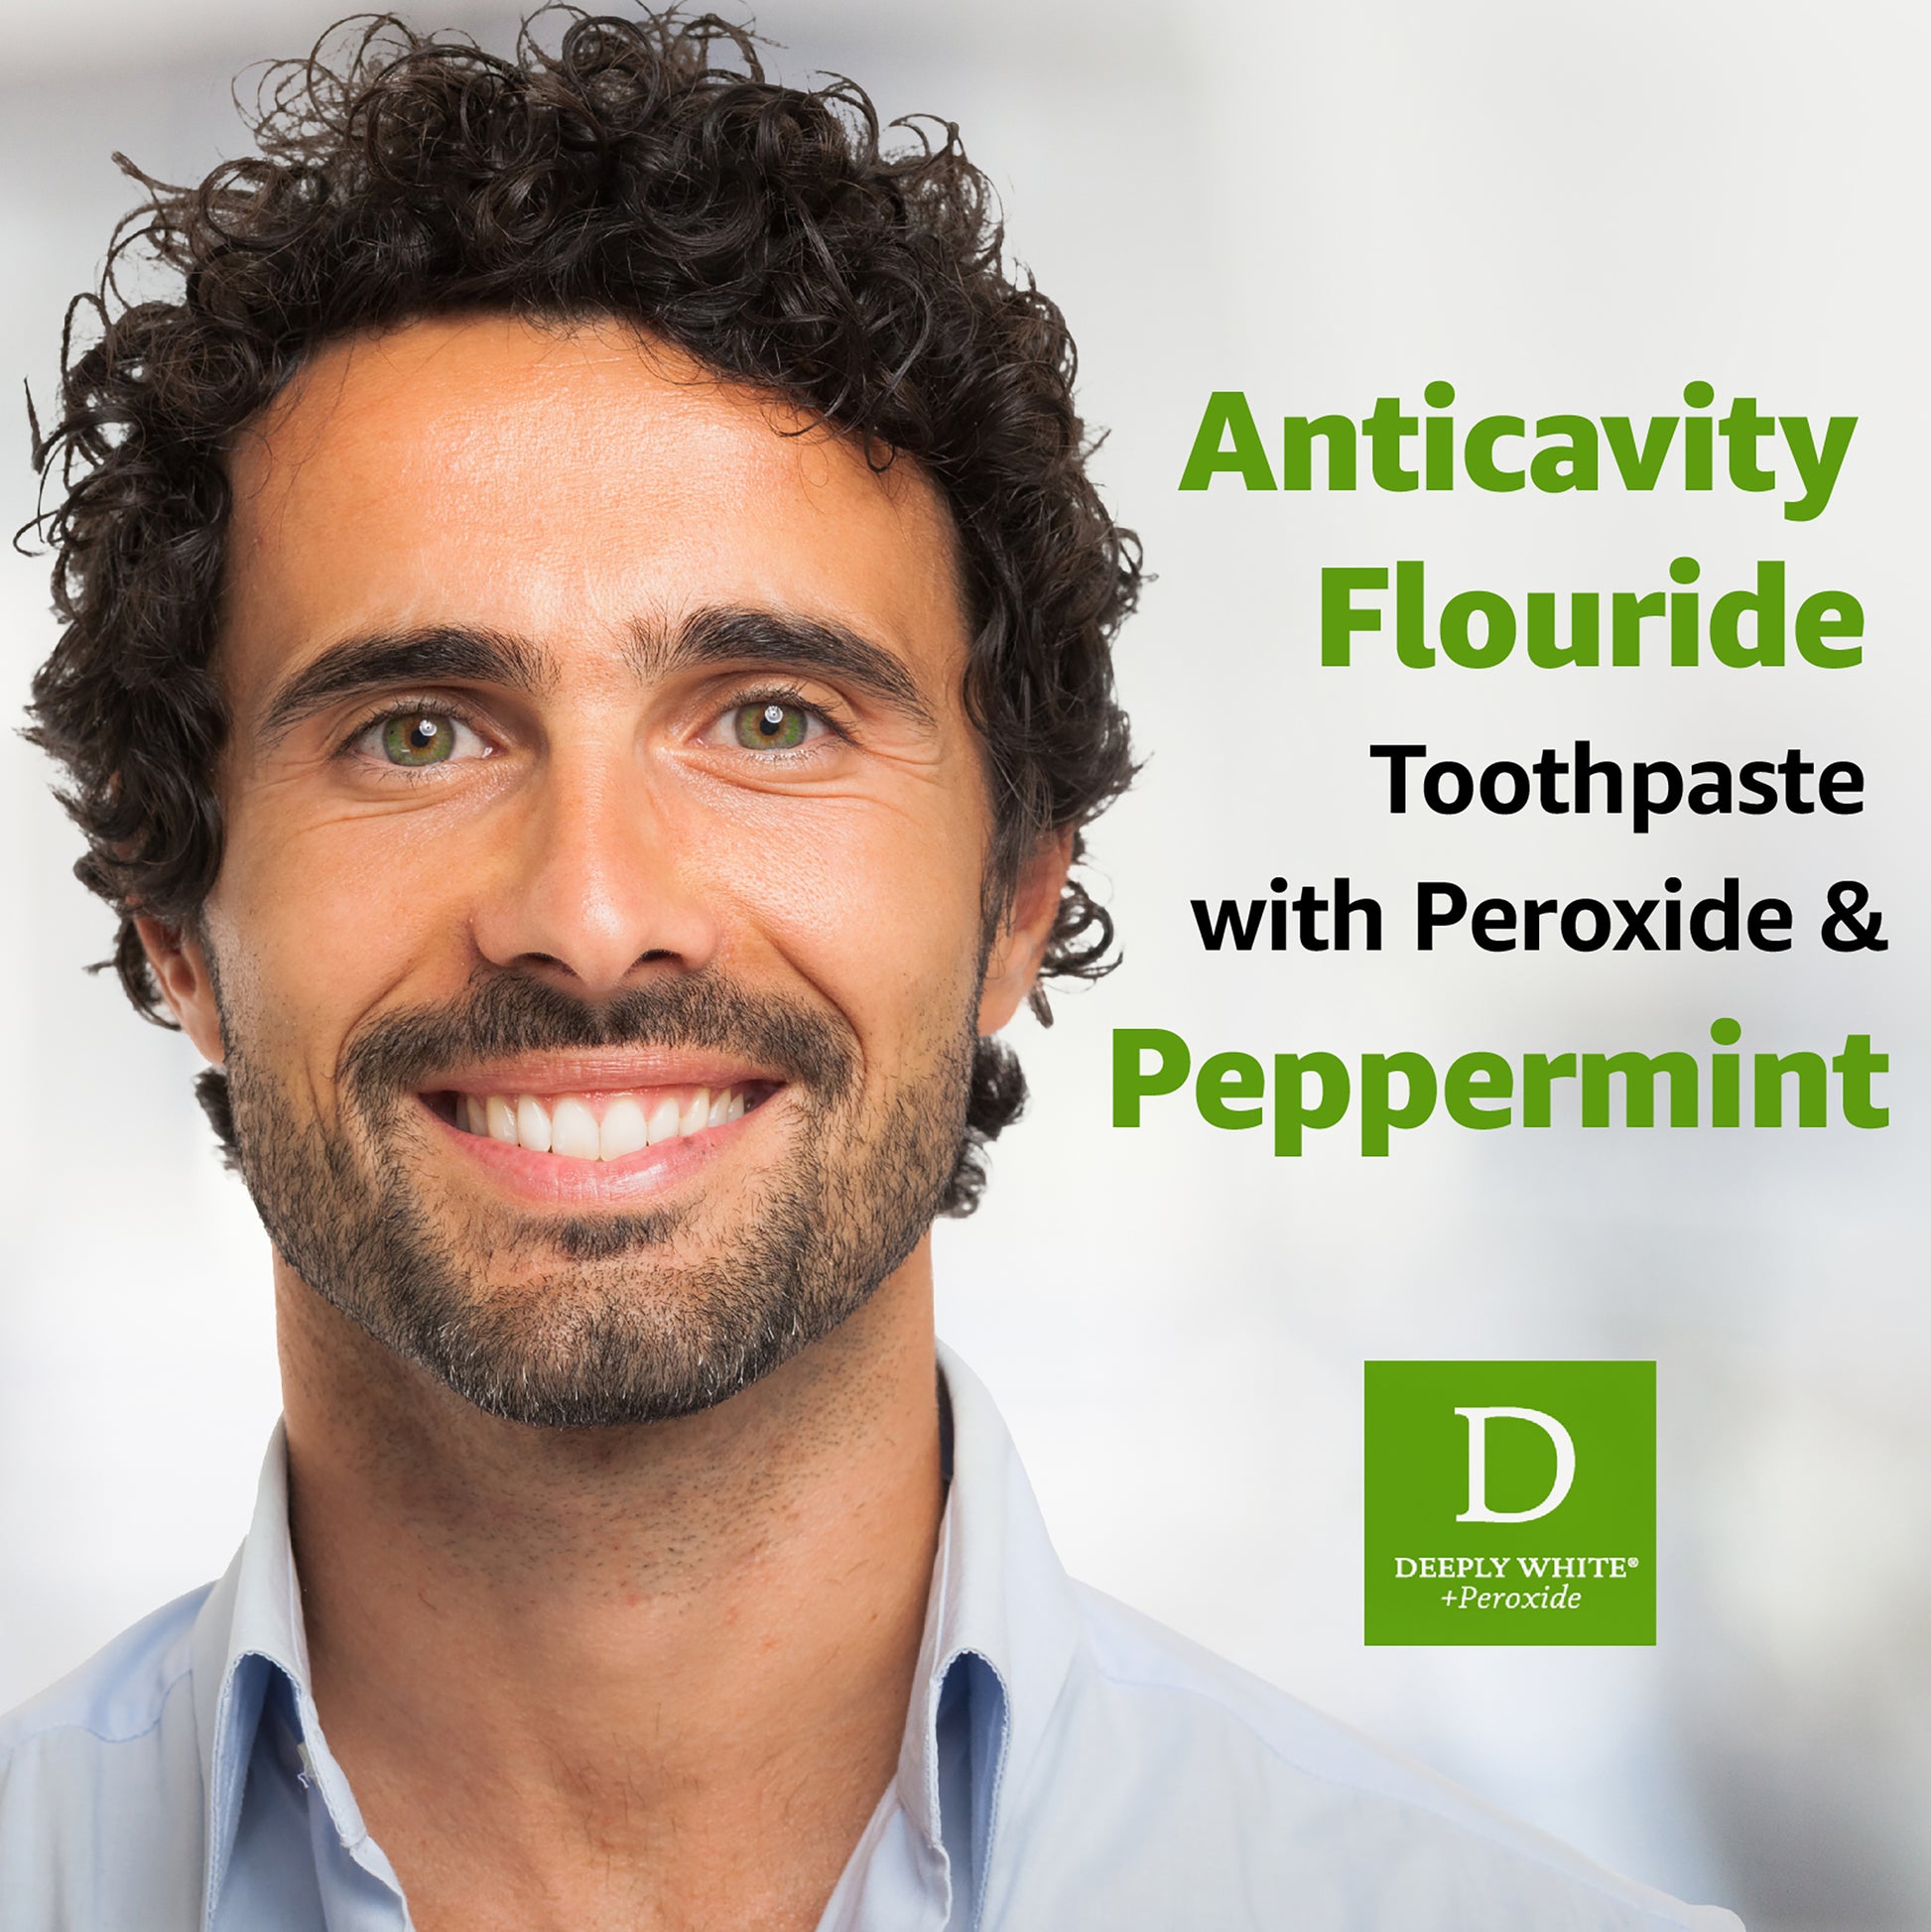 Anticavity fluoride toothpaste with peroxide & peppermint